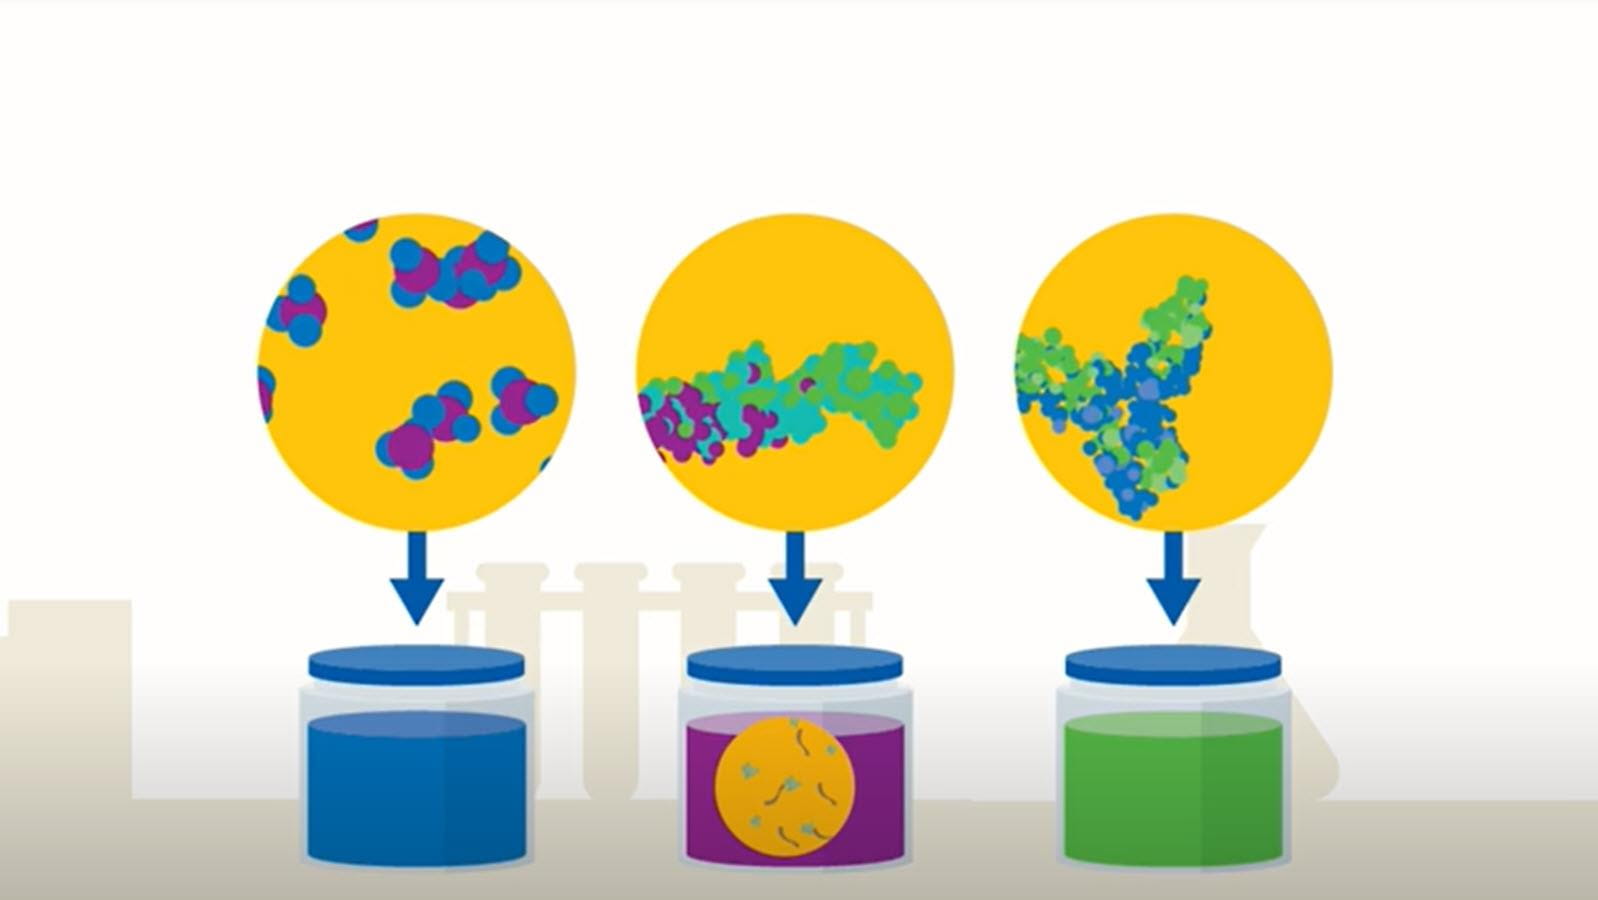 Illustration of different proteins being extracted from plasma